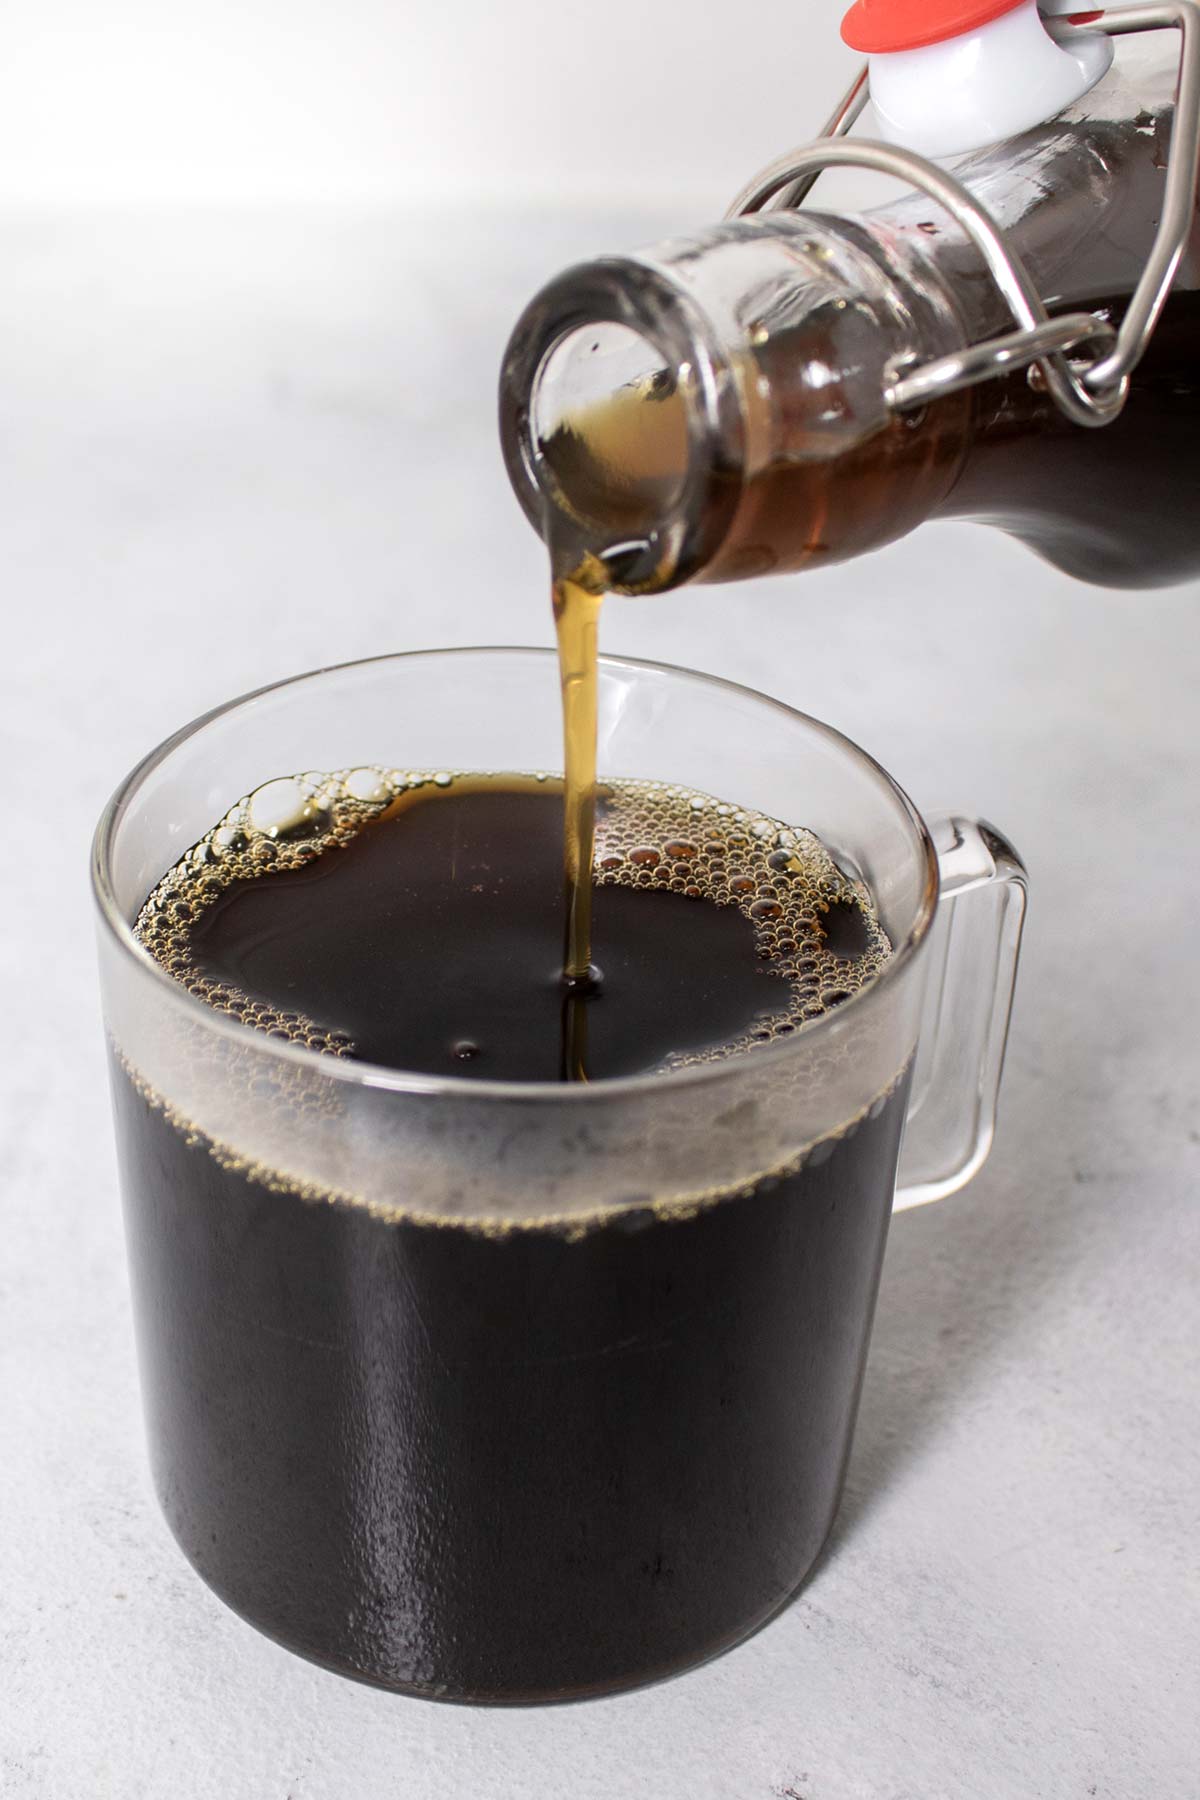 Pouring brown sugar syrup into a cup of coffee.